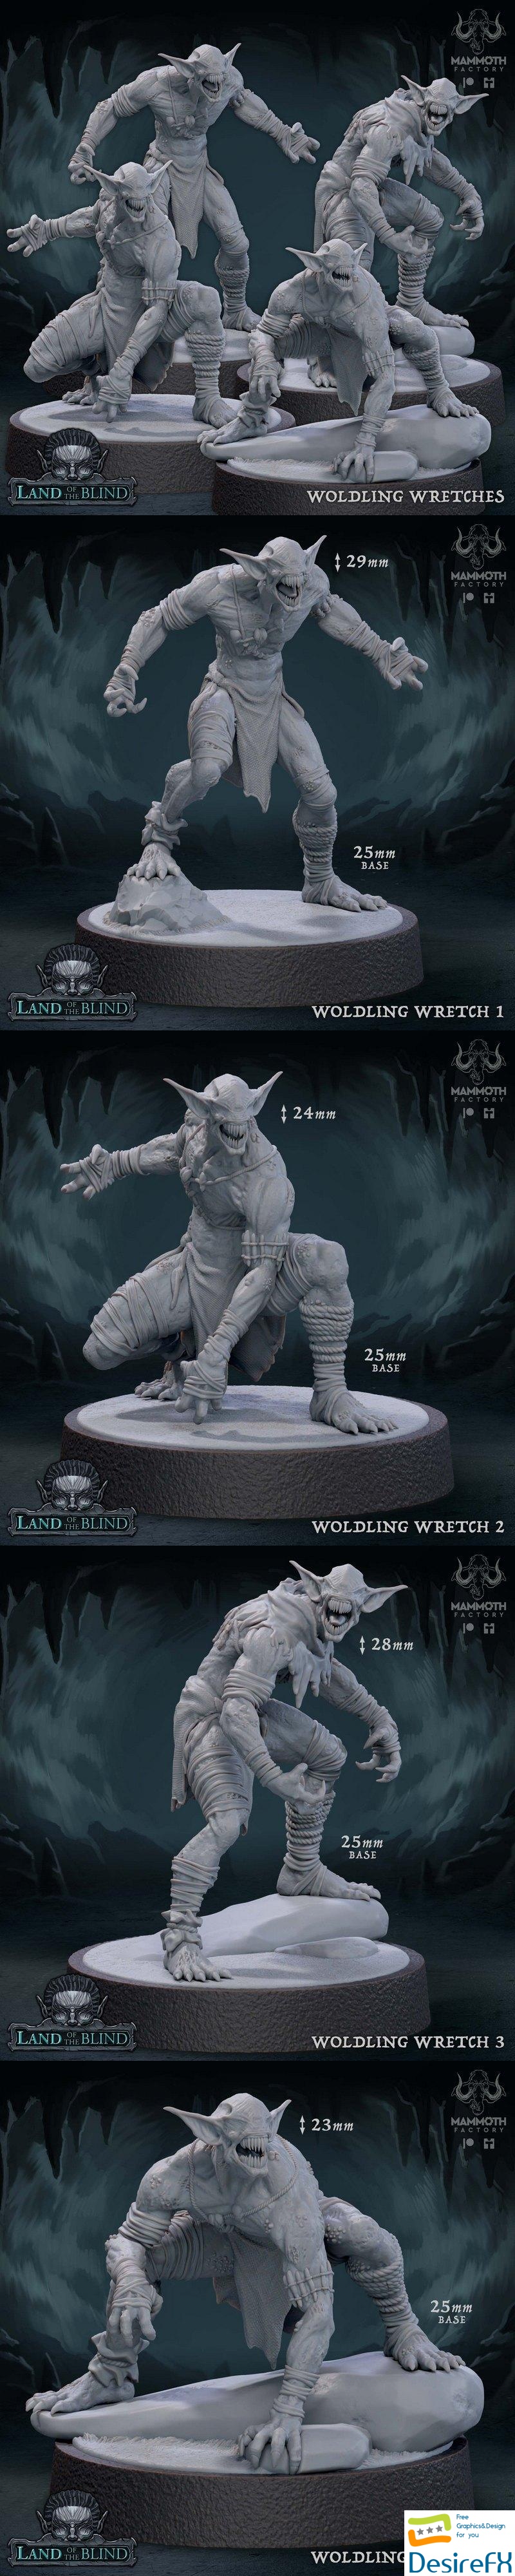 Woldling Wretches - 3D Print